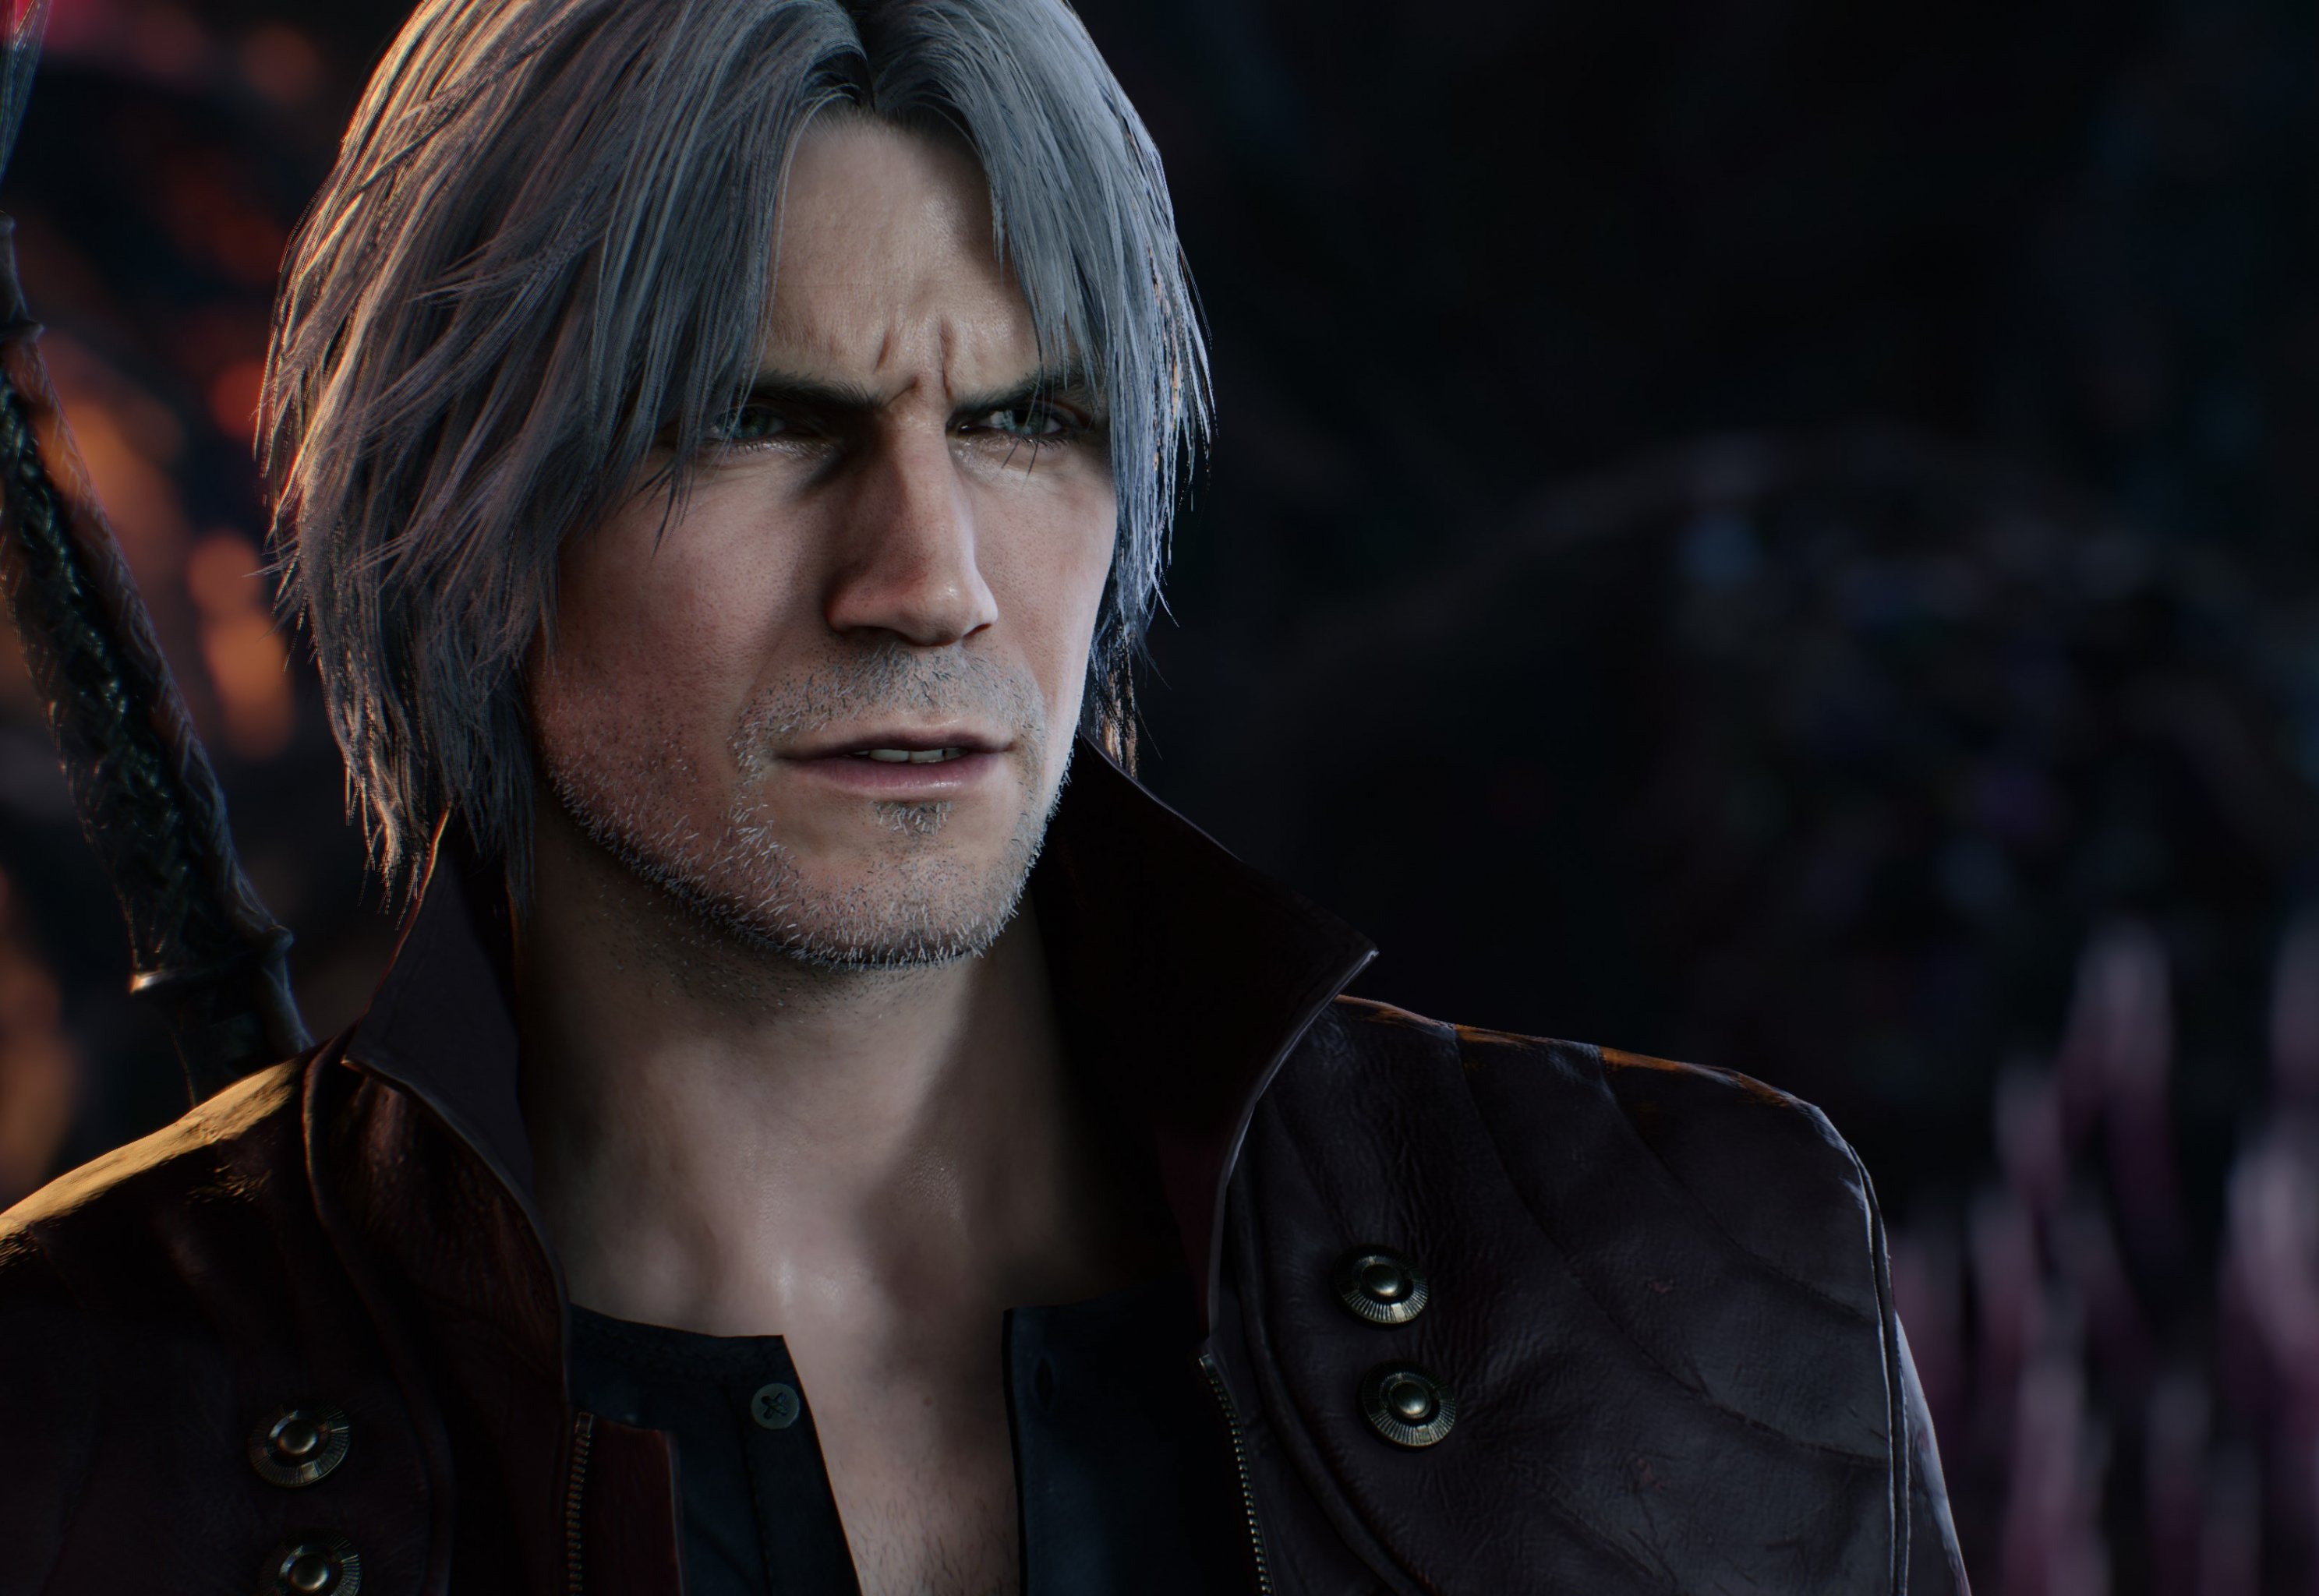 Devil May Cry 5 review: This game absolutely rules